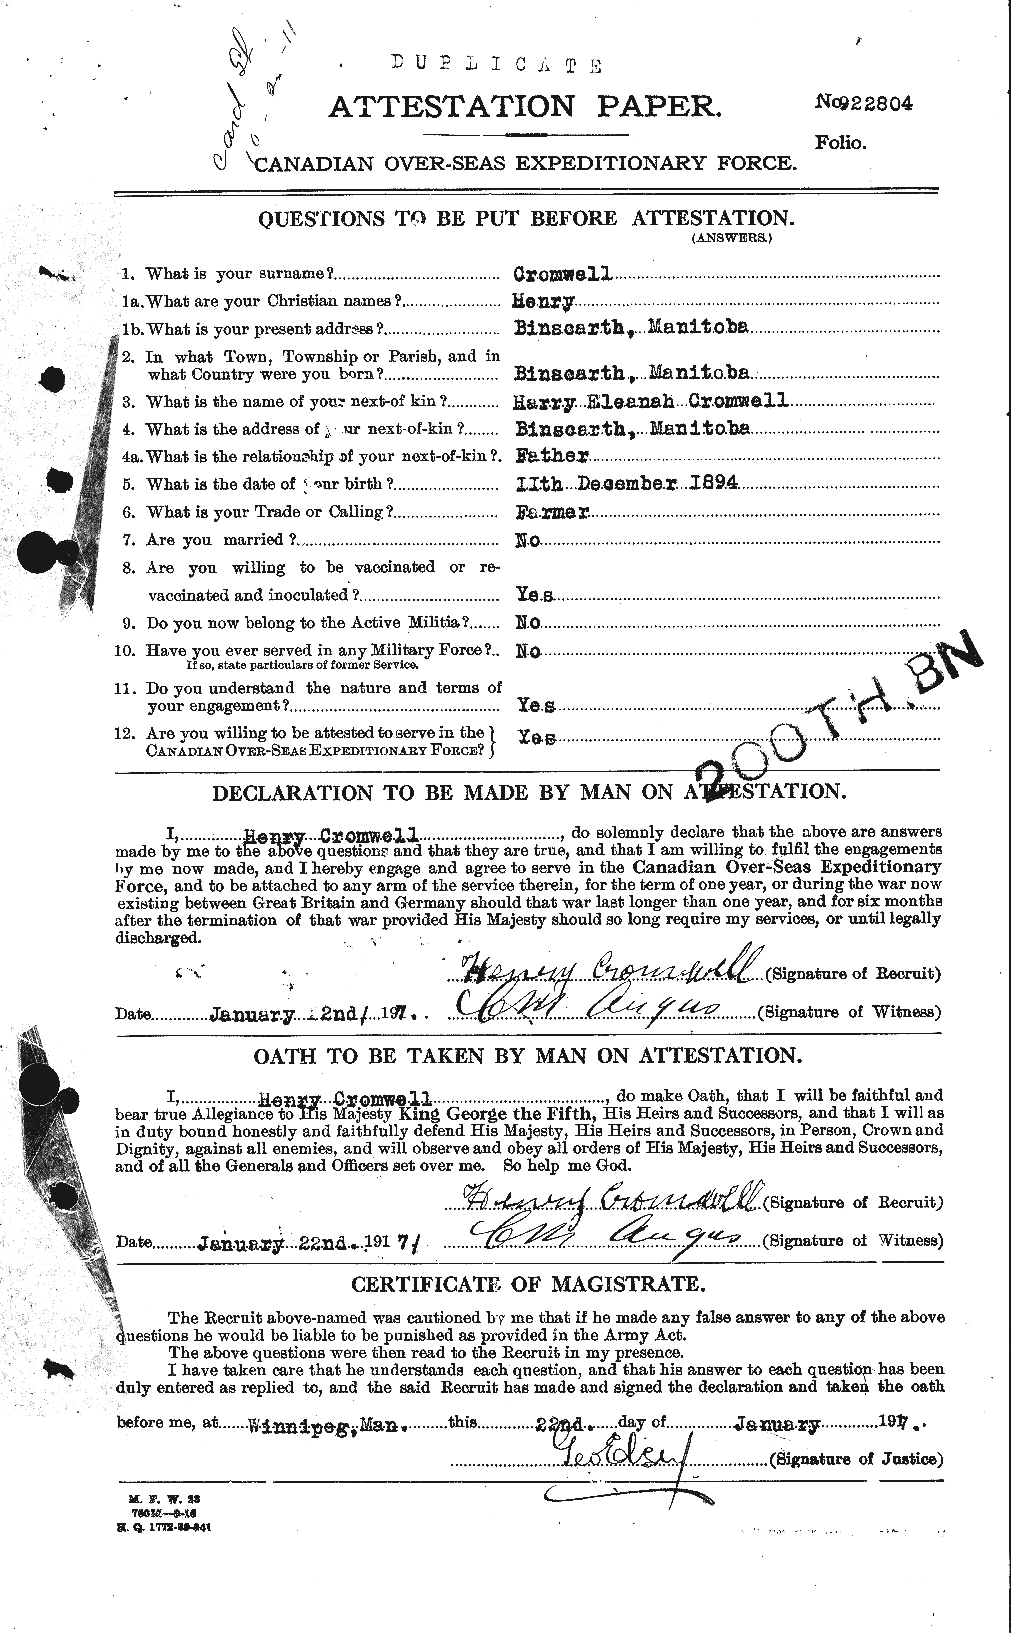 Personnel Records of the First World War - CEF 064926a